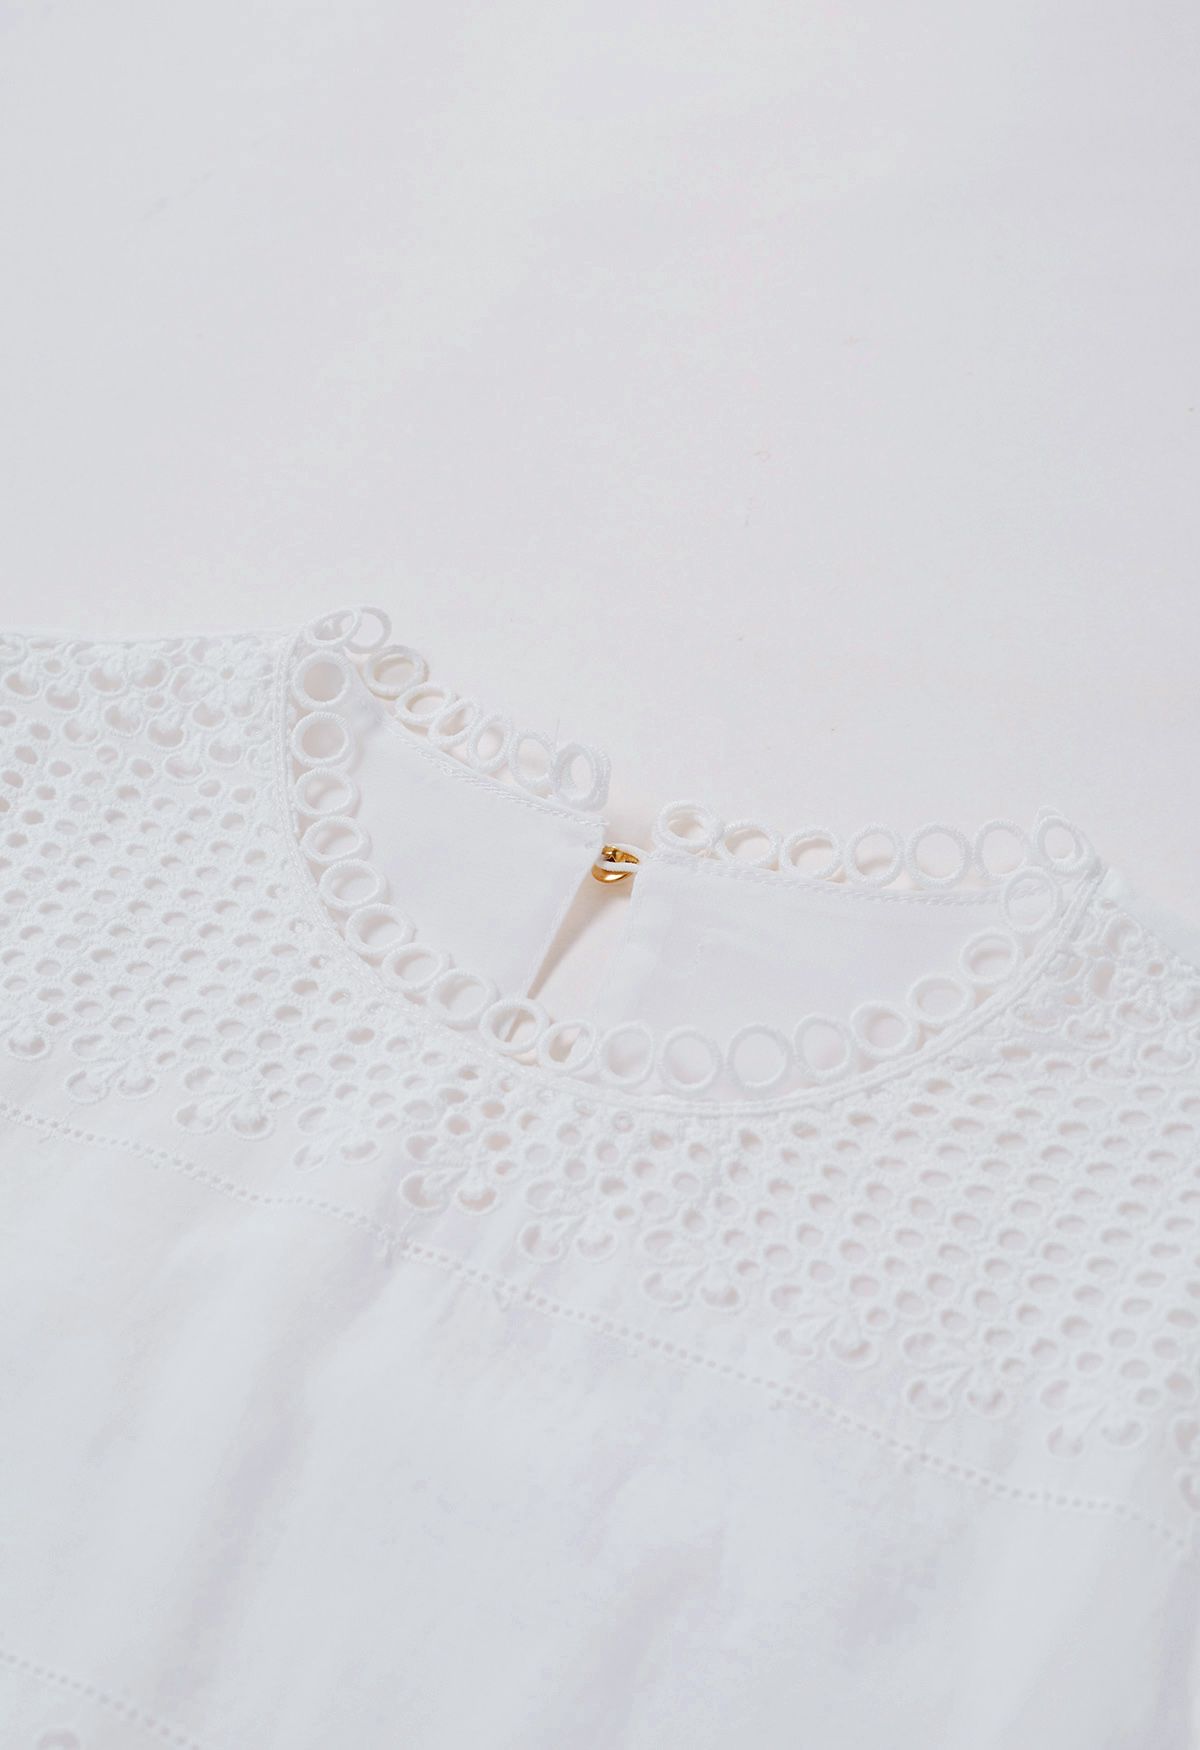 Boho Chic Eyelet Embroidered Cotton Top in White